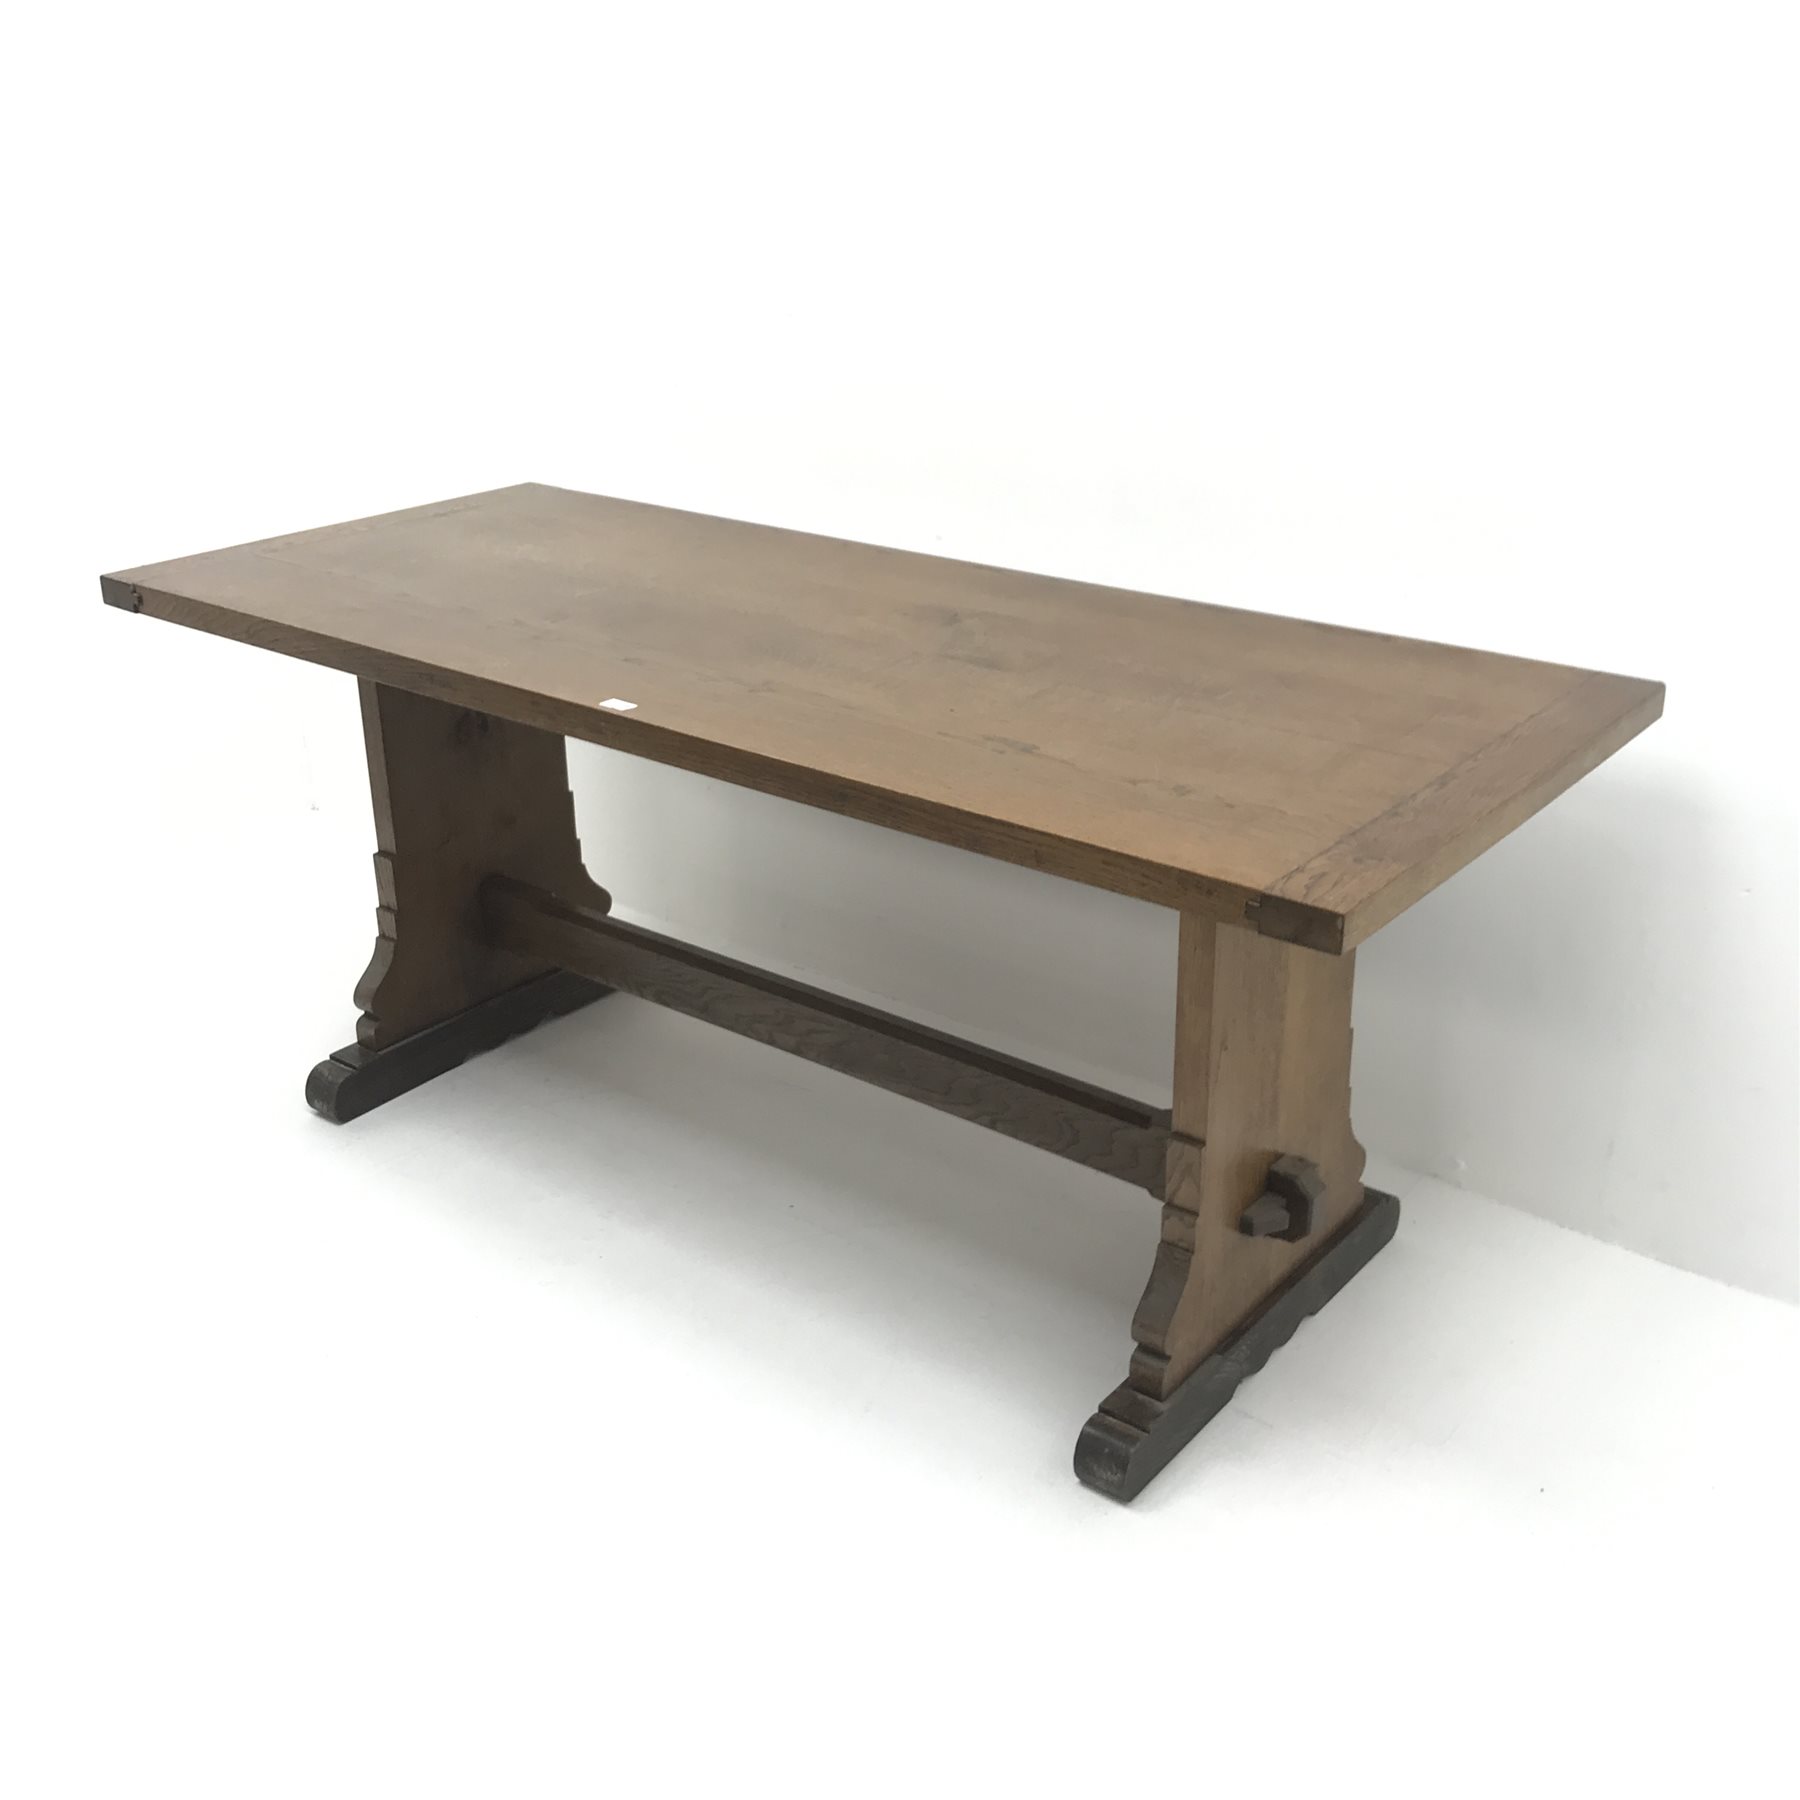 20th century oak refectory table, shaped solid end supports joined by single undertier, sledge feet, - Image 4 of 8